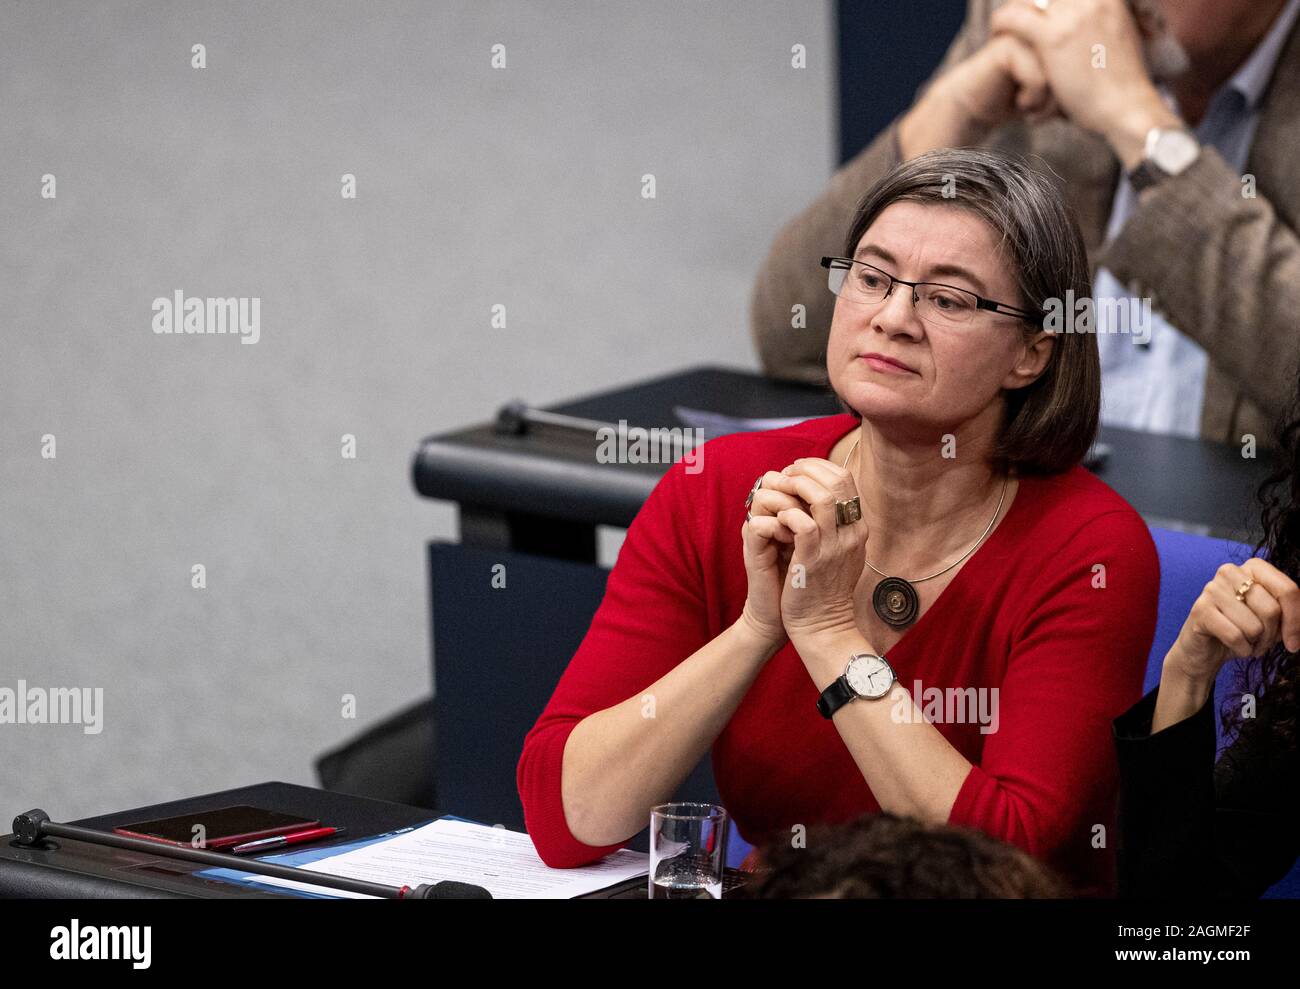 Berlin, Germany. 20th Dec, 2019. Anke Domscheit-Berg (Die Linke), Member of the German Bundestag, speaks on agenda item "Artificial Intelligence". The topics of the 138th session the 19th legislative period